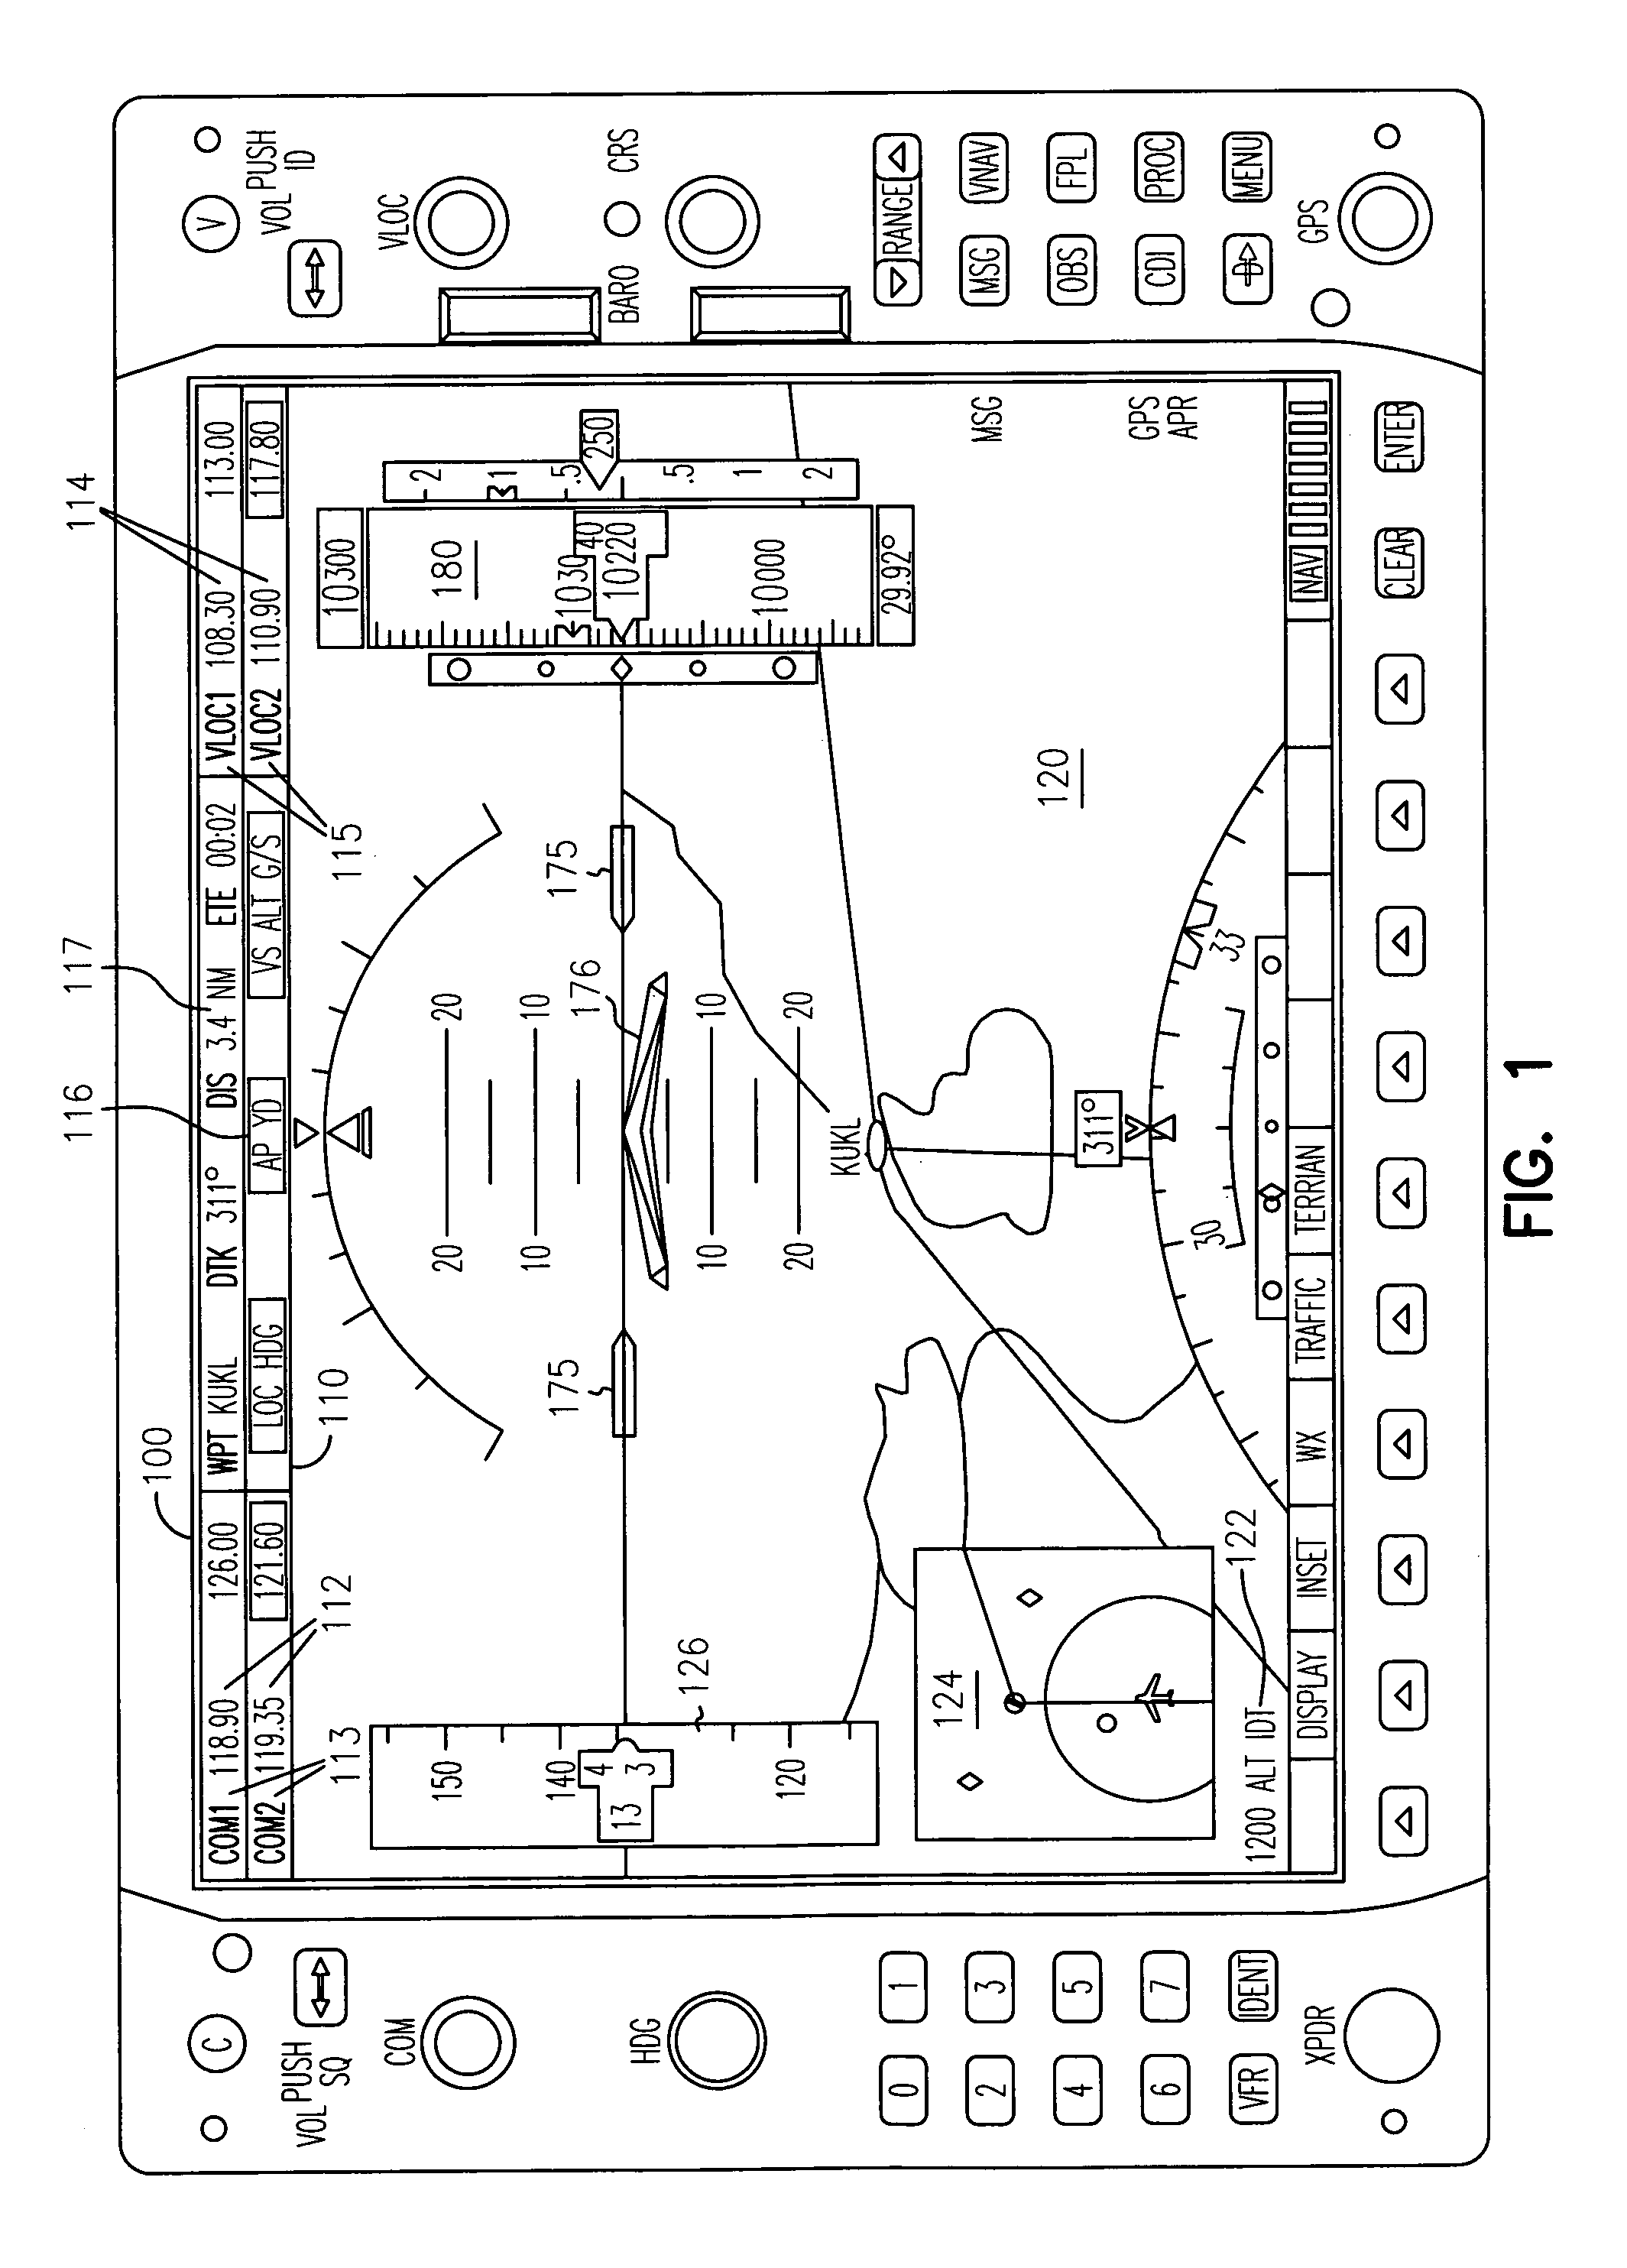 Cockpit display systems and methods of presenting data on cockpit displays